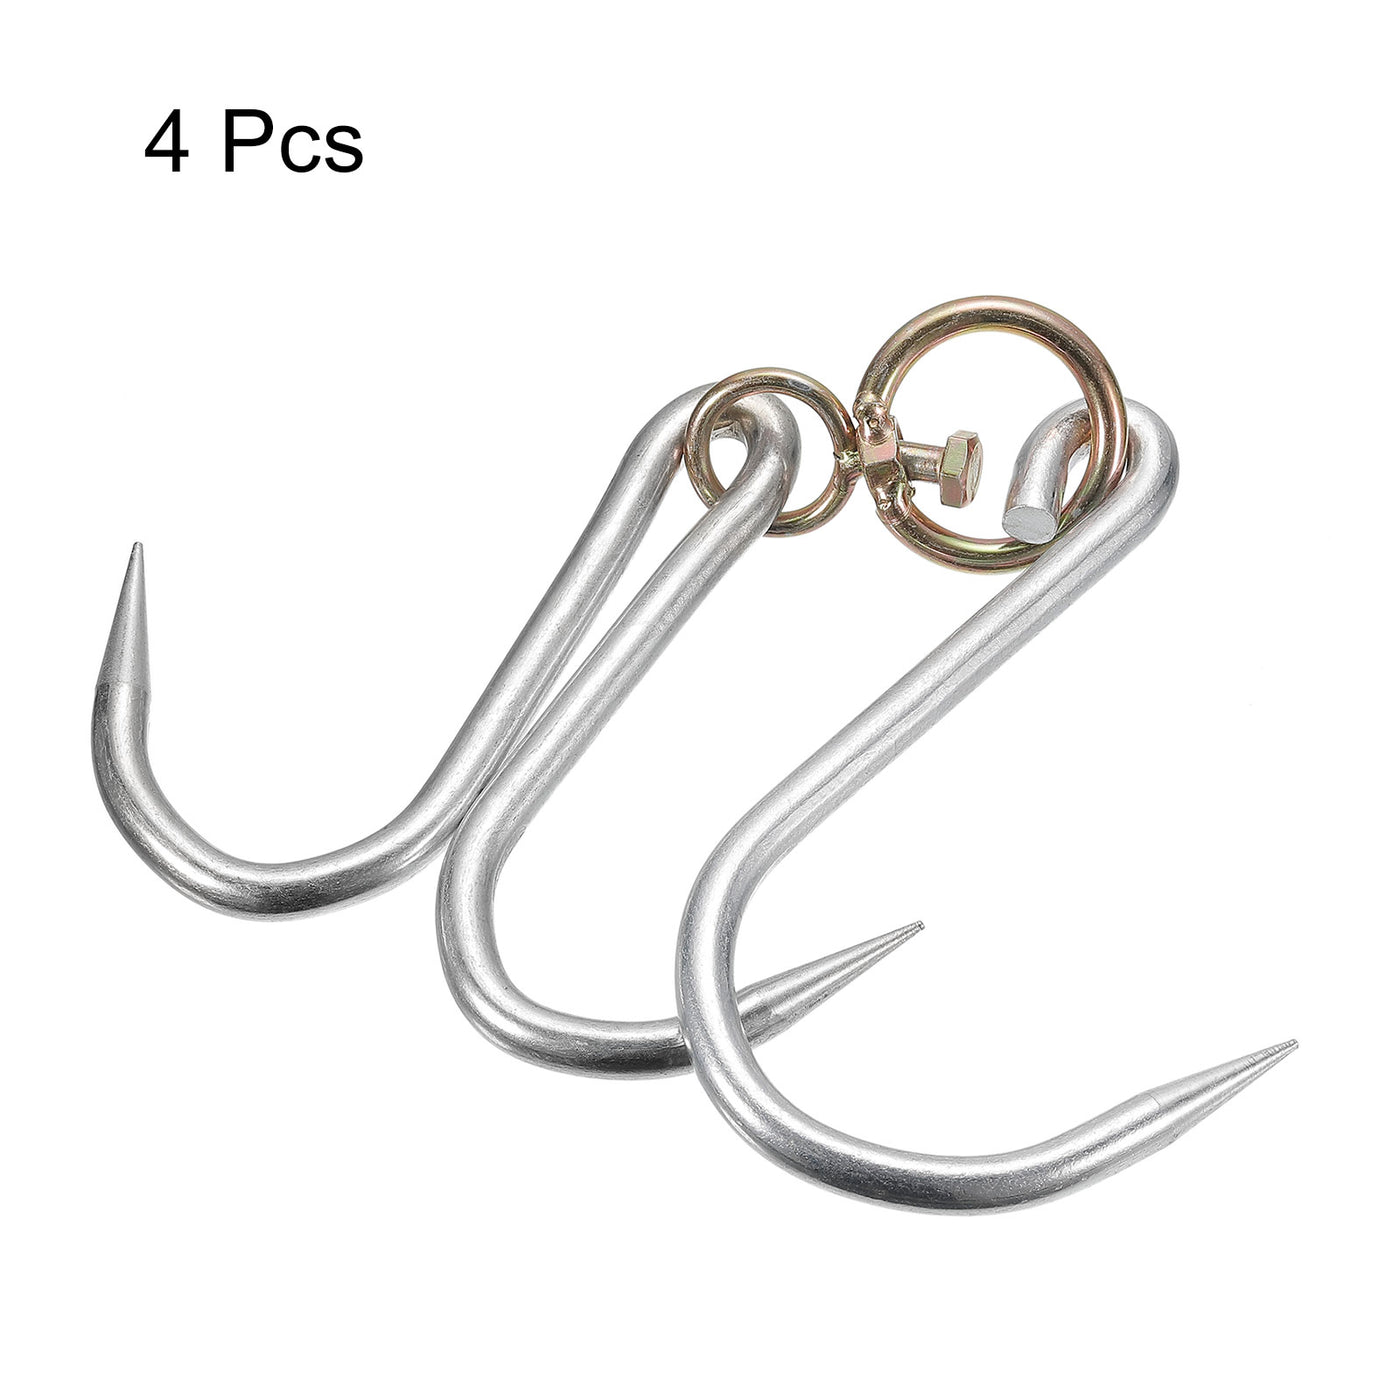 uxcell Uxcell Double Meat Hooks, Galvanized Integrated Swivel Meat Hooks for Hanging Drying Smoking Meat Product